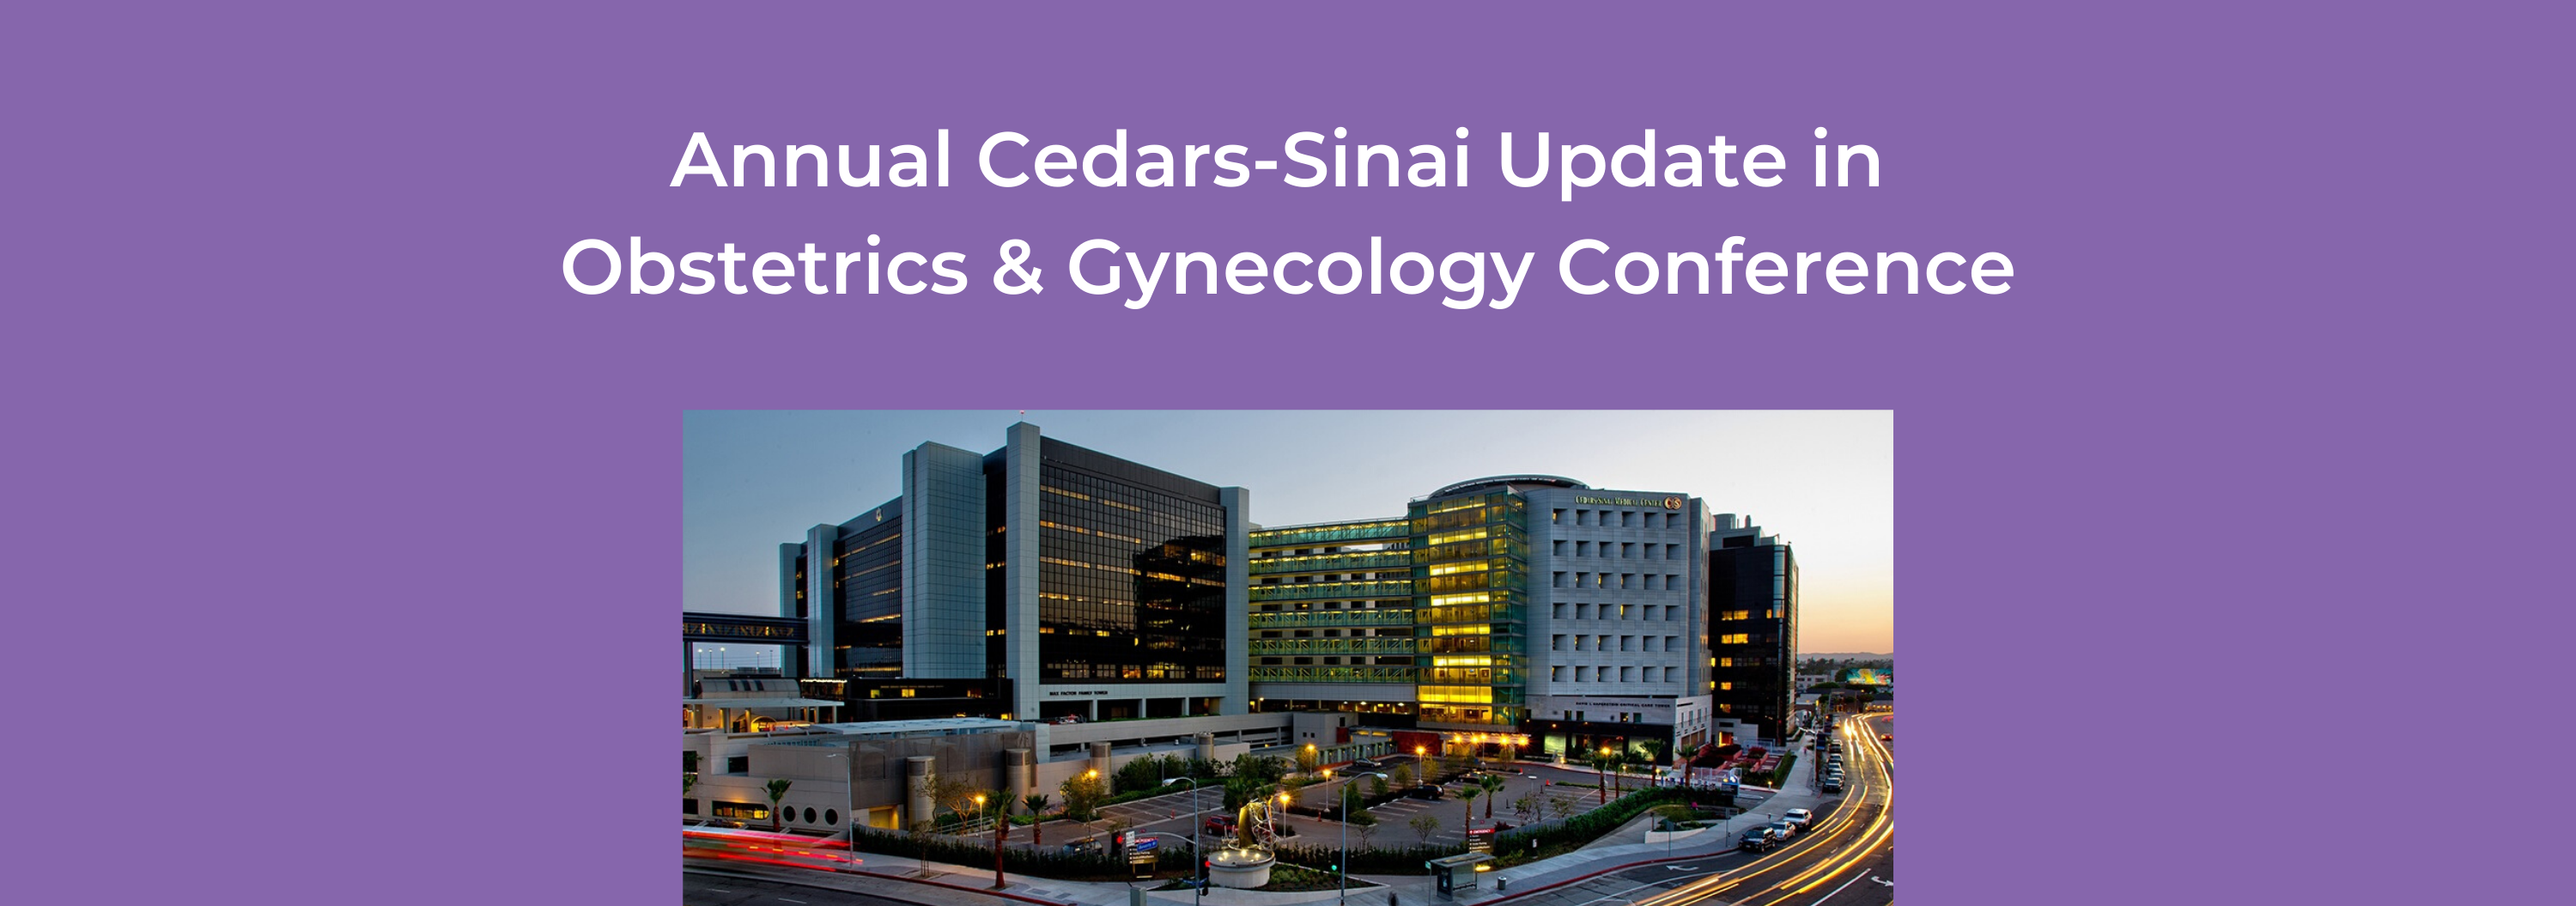 6th Annual Cedars-Sinai Update in Obstetrics & Gynecology Conference Banner